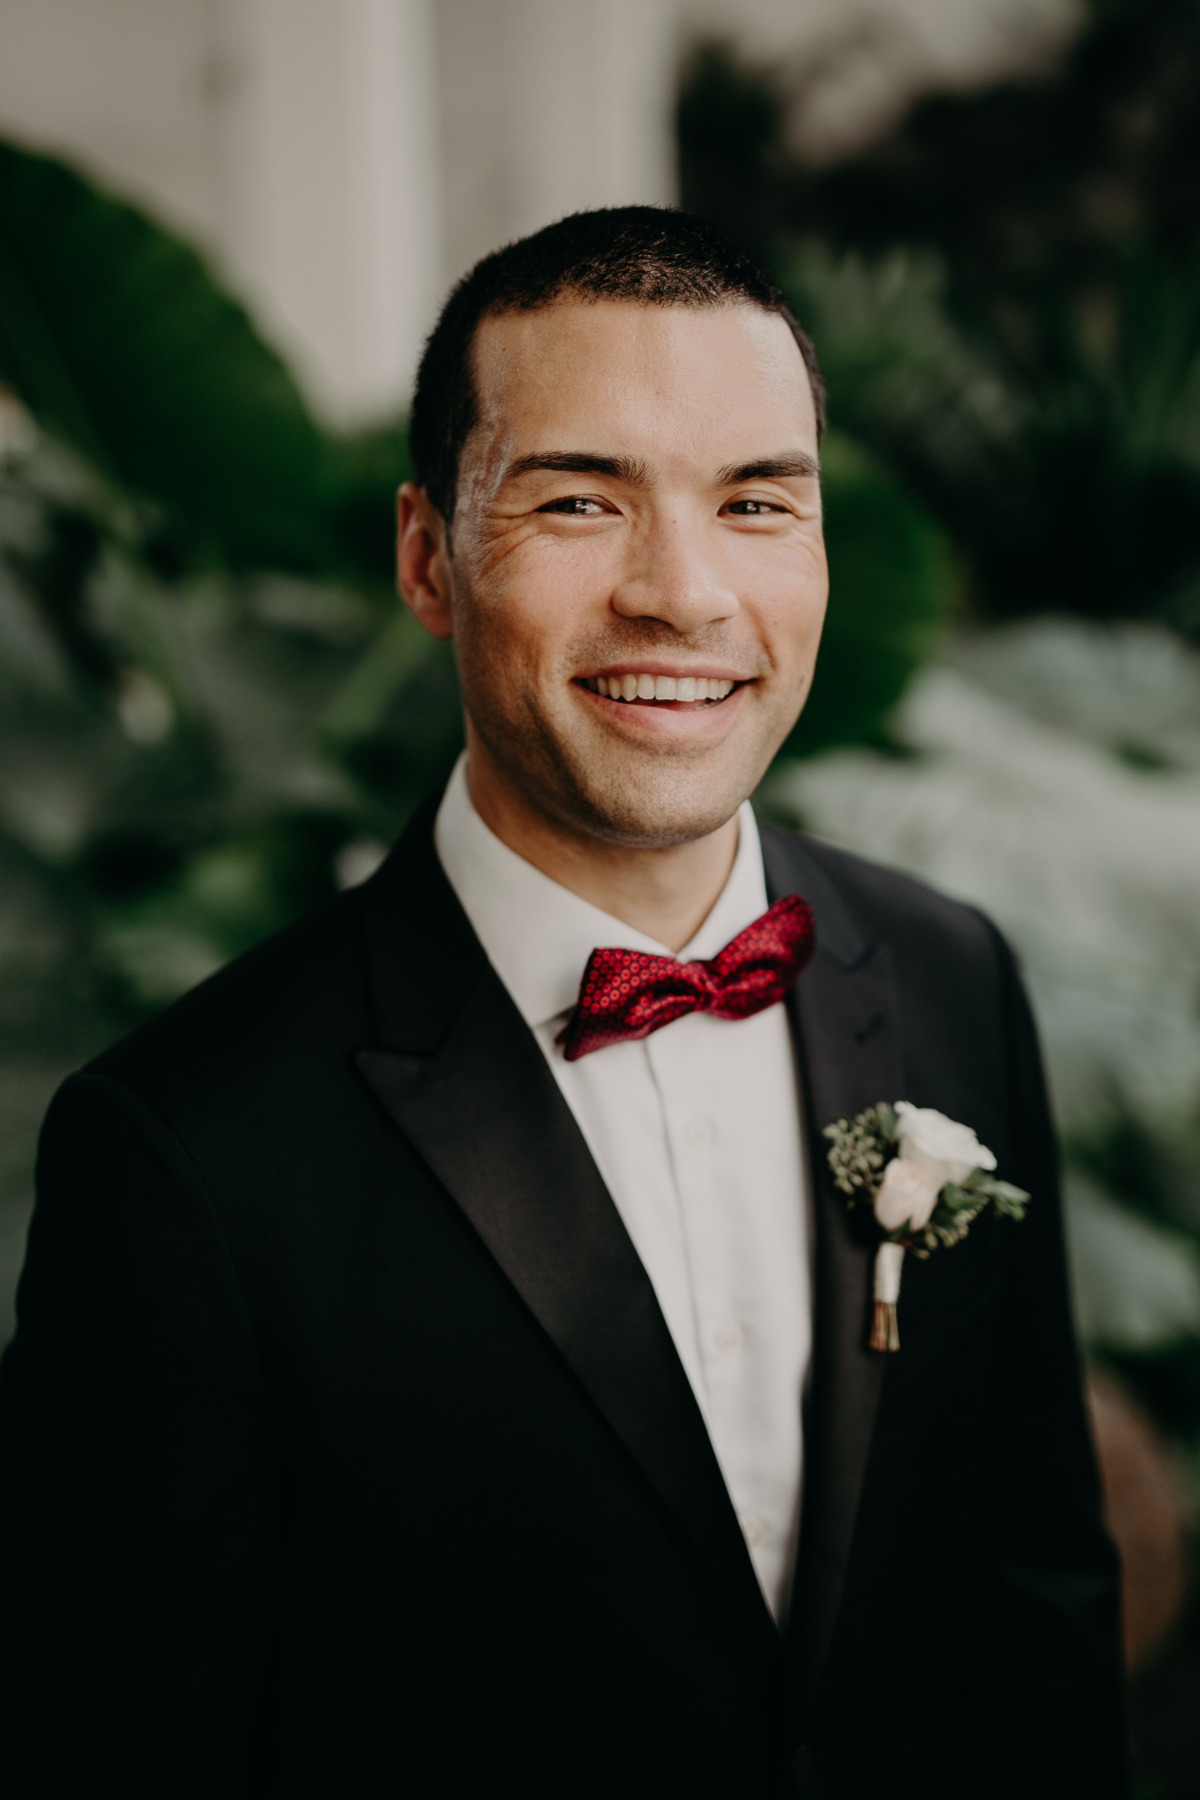 groom in tux with red bow tie